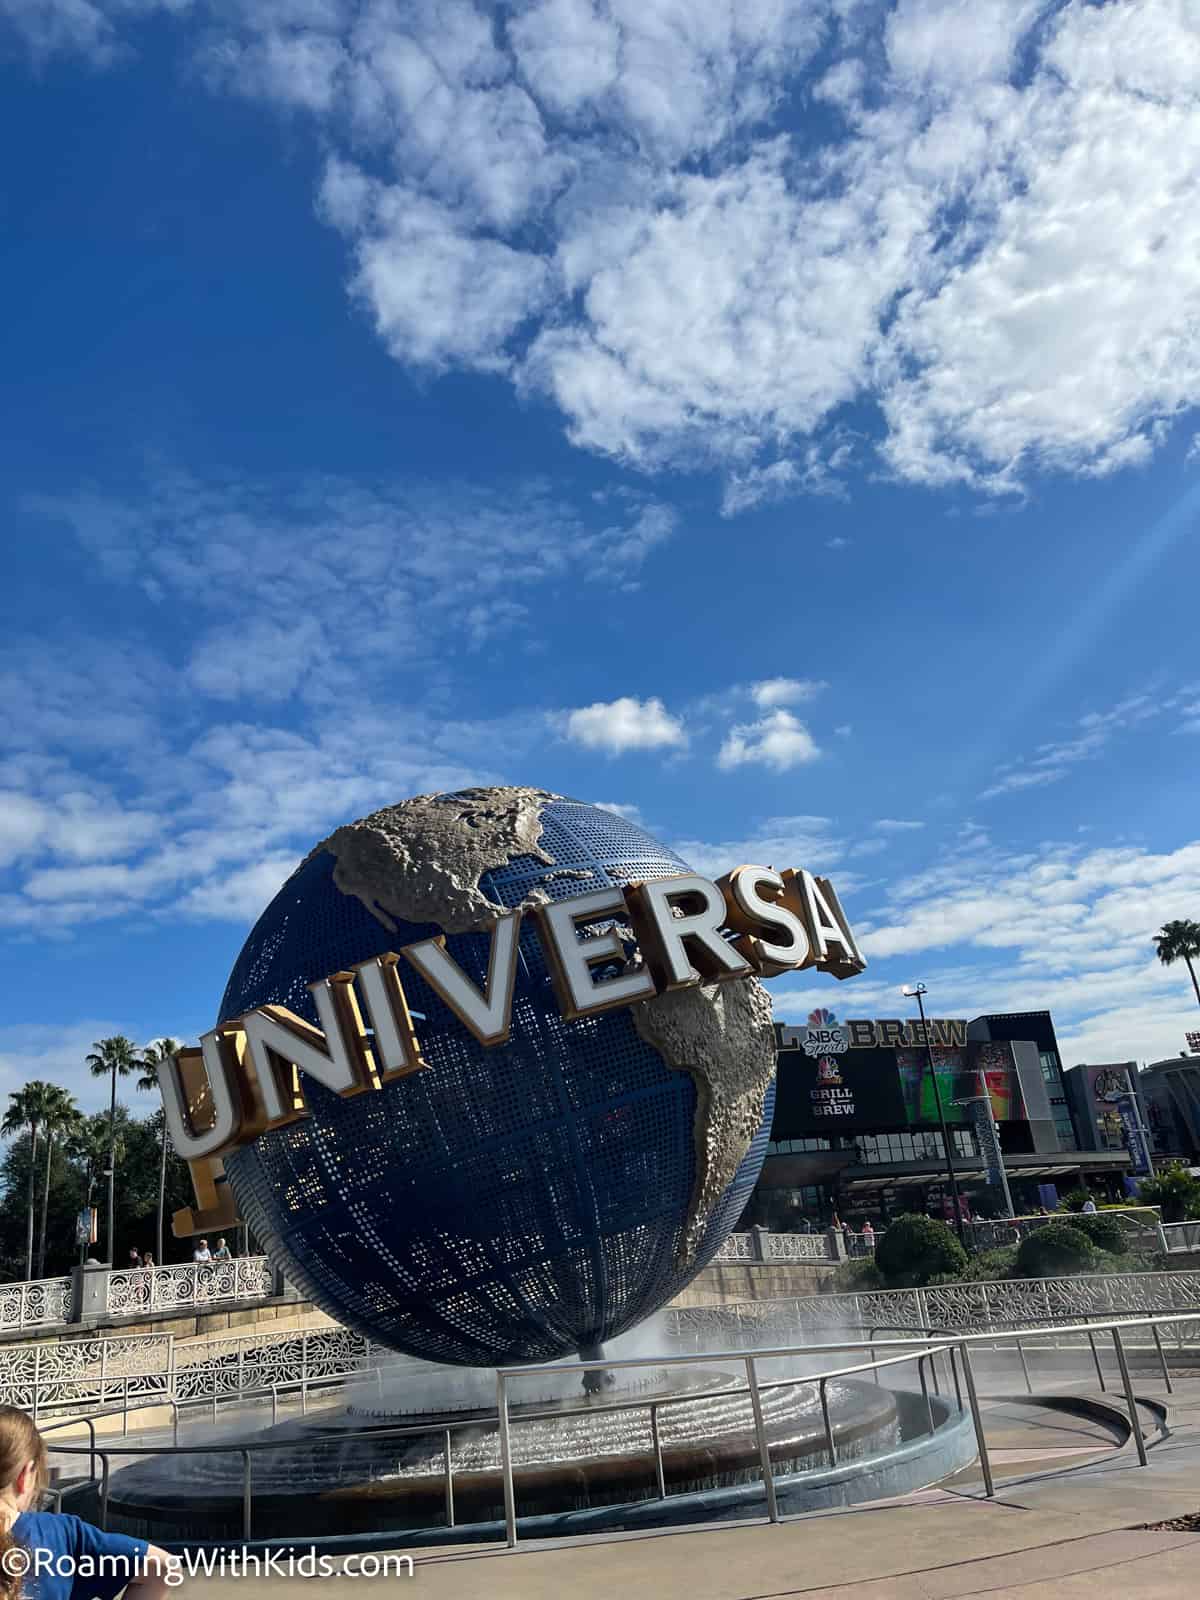 Hotels in Walking Distance of Universal Orlando